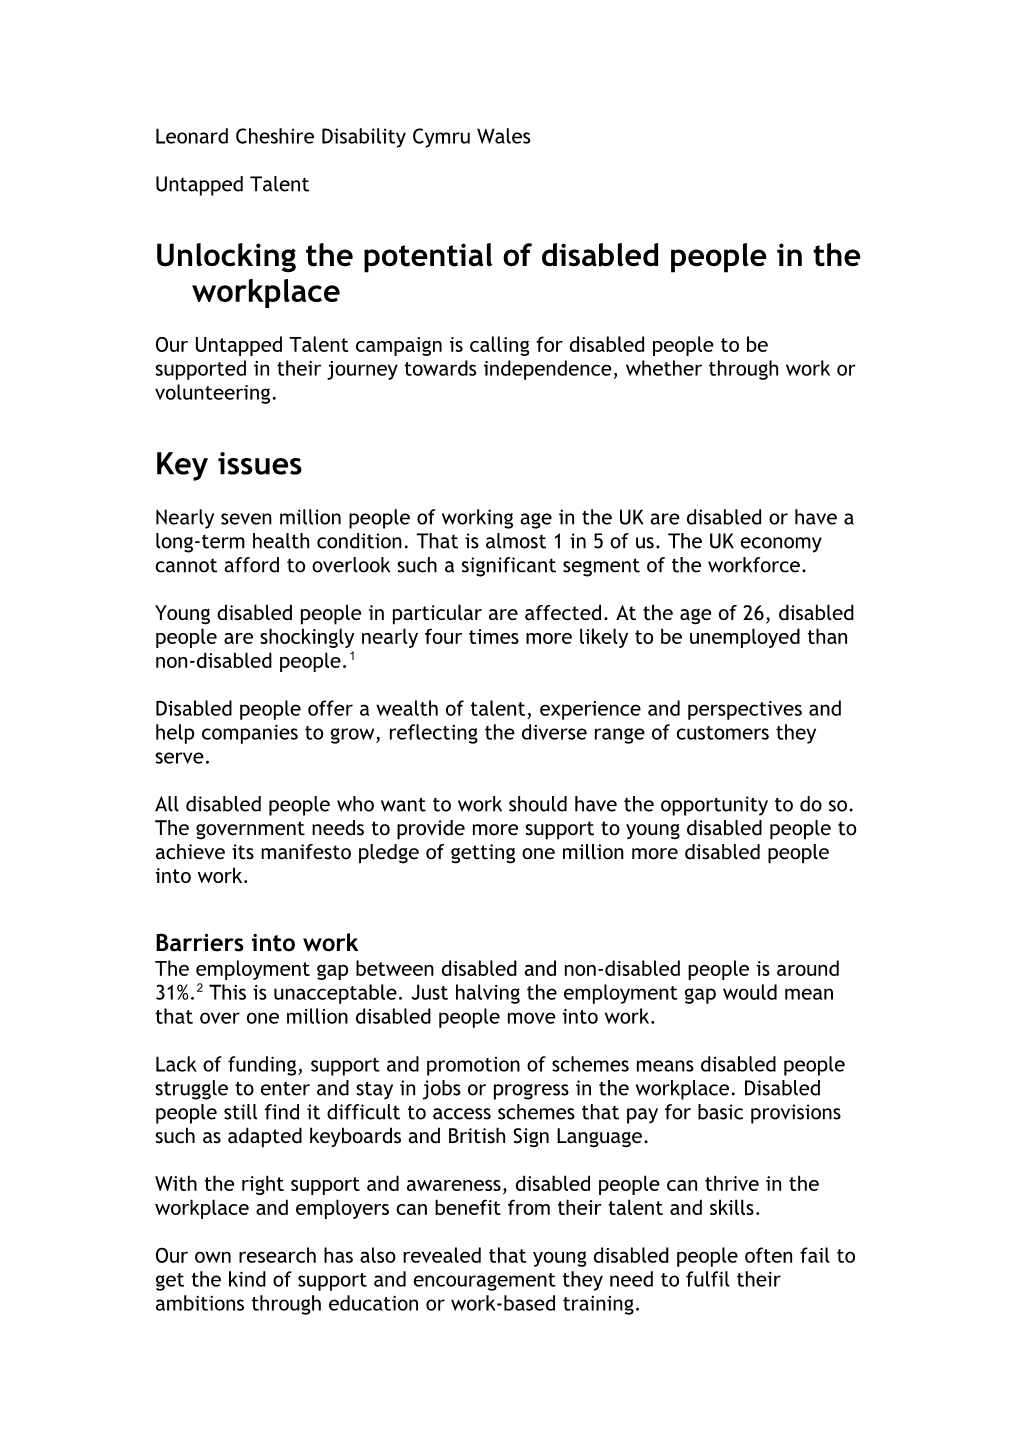 Unlocking the Potential of Disabled People in the Workplace